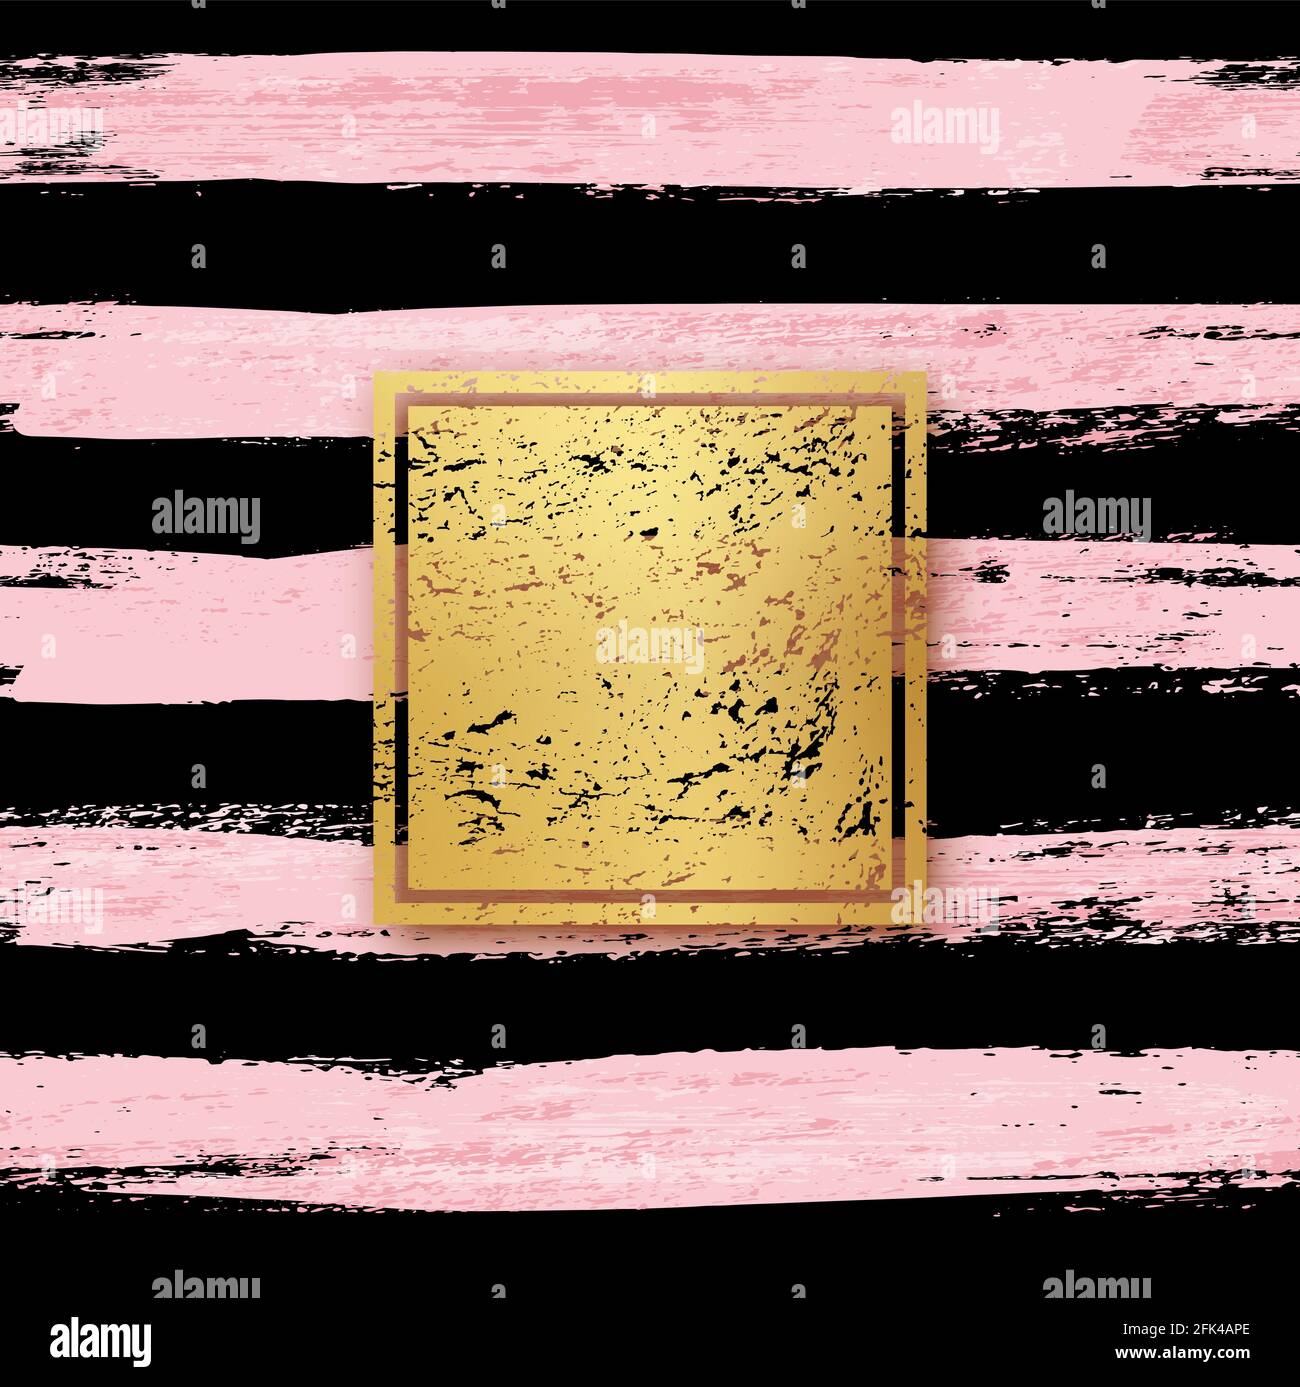 Golden foil with frame on black and pink brush background. Gold texture in square shape on smudged striped wallpaper in brushstrokes vector illustrati Stock Vector